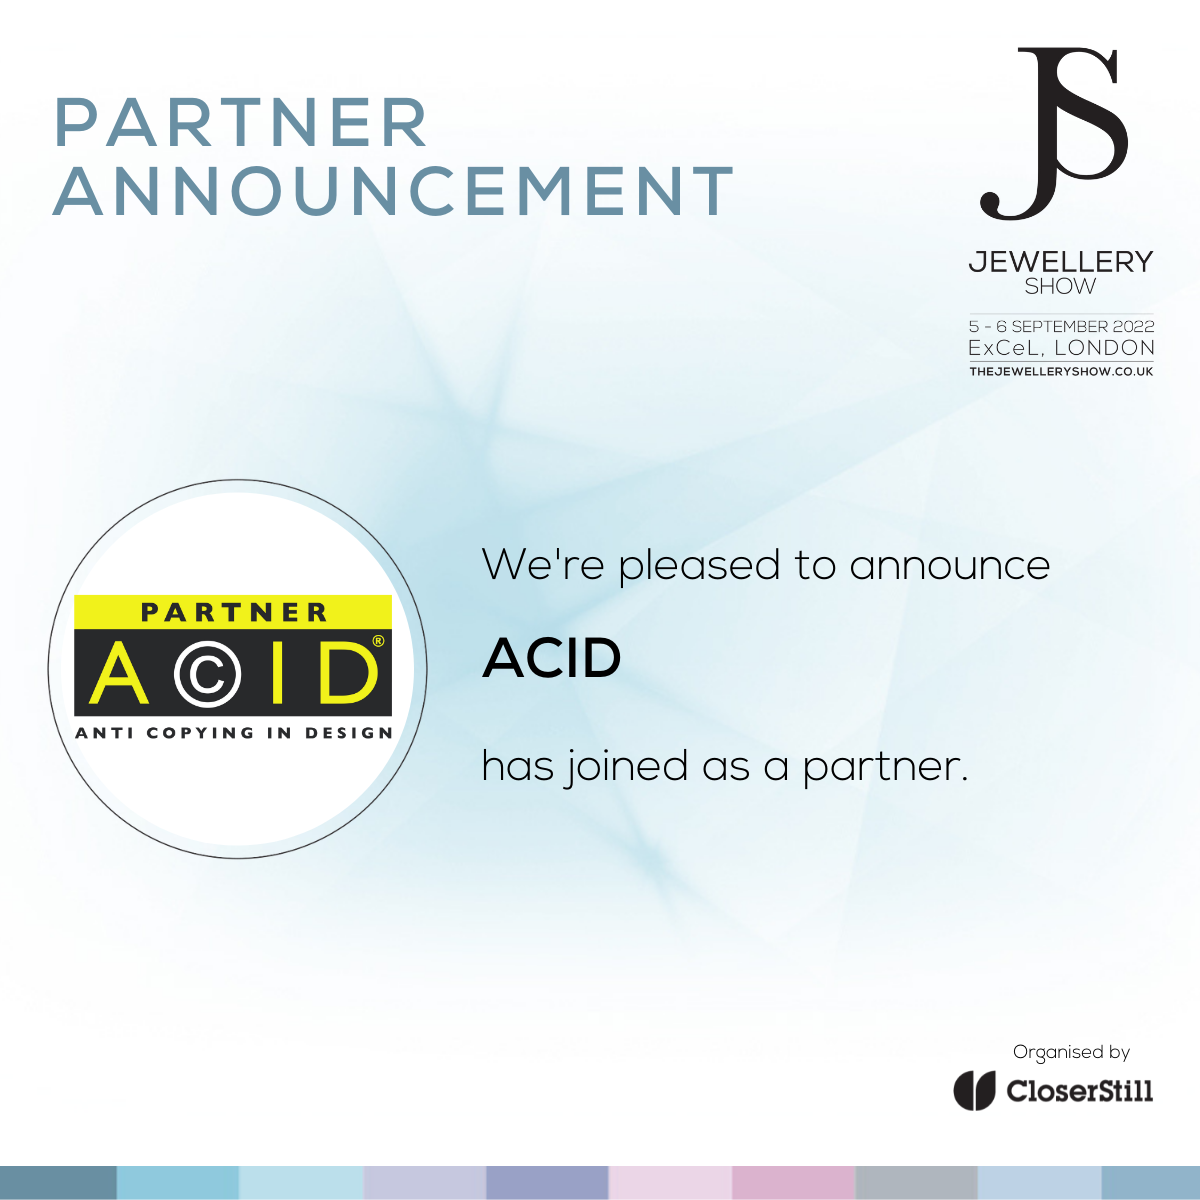 Jewellery Show Announces New Partnership Agreement with ACID